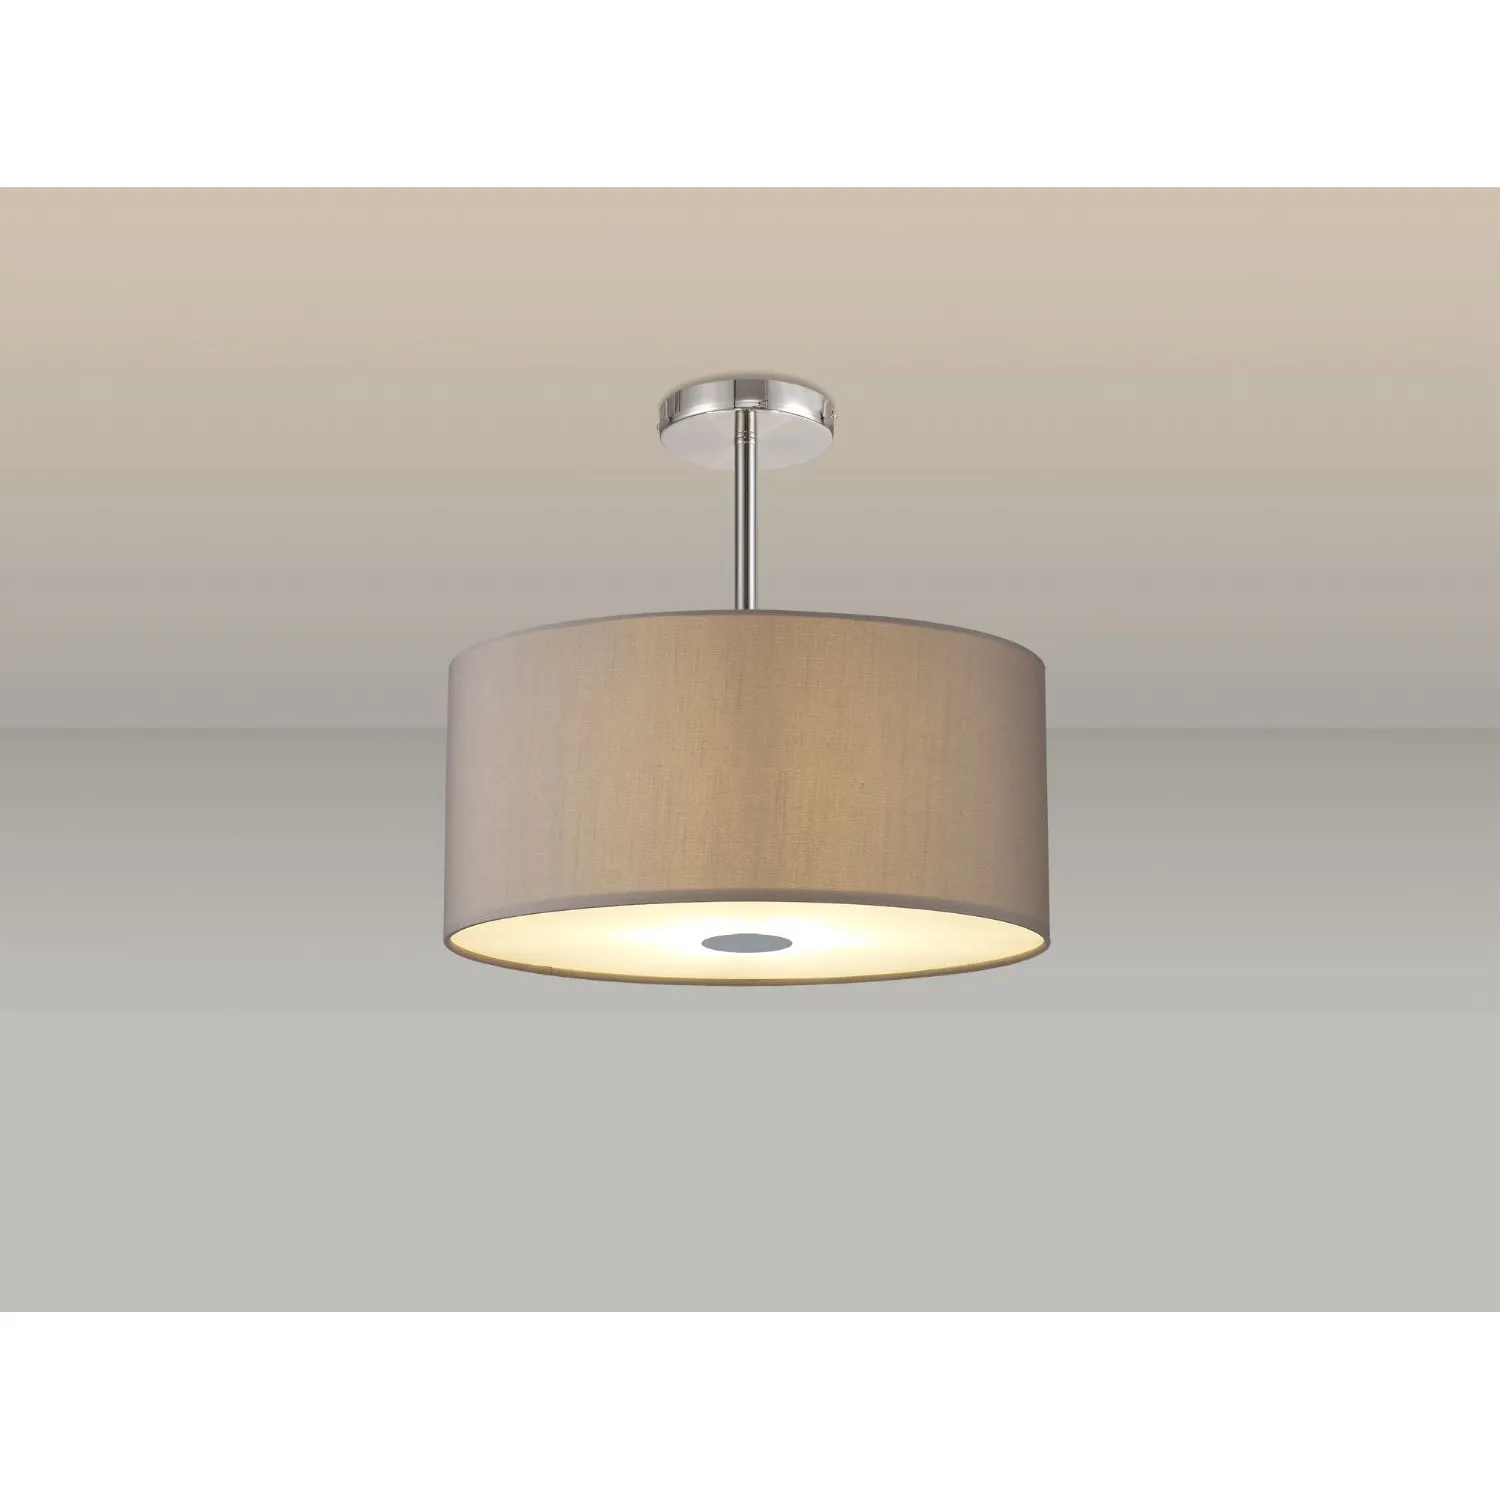 Baymont Polished Chrome 5 Light E27 Semi Flush c w 400mm Faux Silk Shade, Grey White Laminate And 400mm Frosted PC Acrylic Diffuser